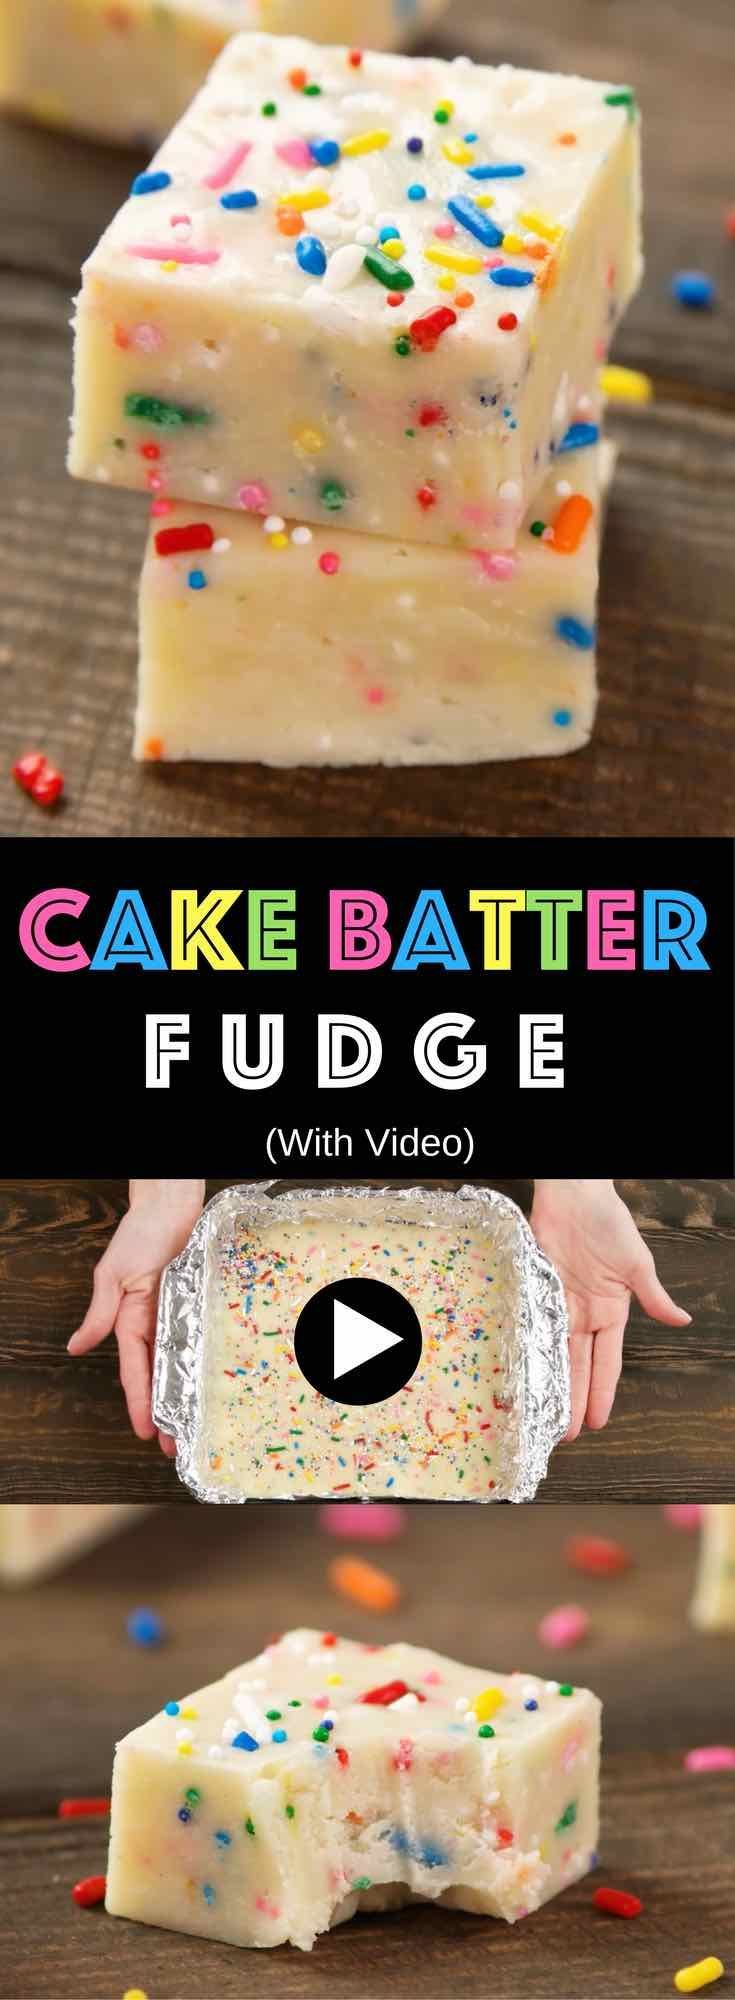 Easy Cake Batter Fudge – Creamy and chocolaty, sweet and soft, with colorful sprinkles. All you need is a few simple ingredients: